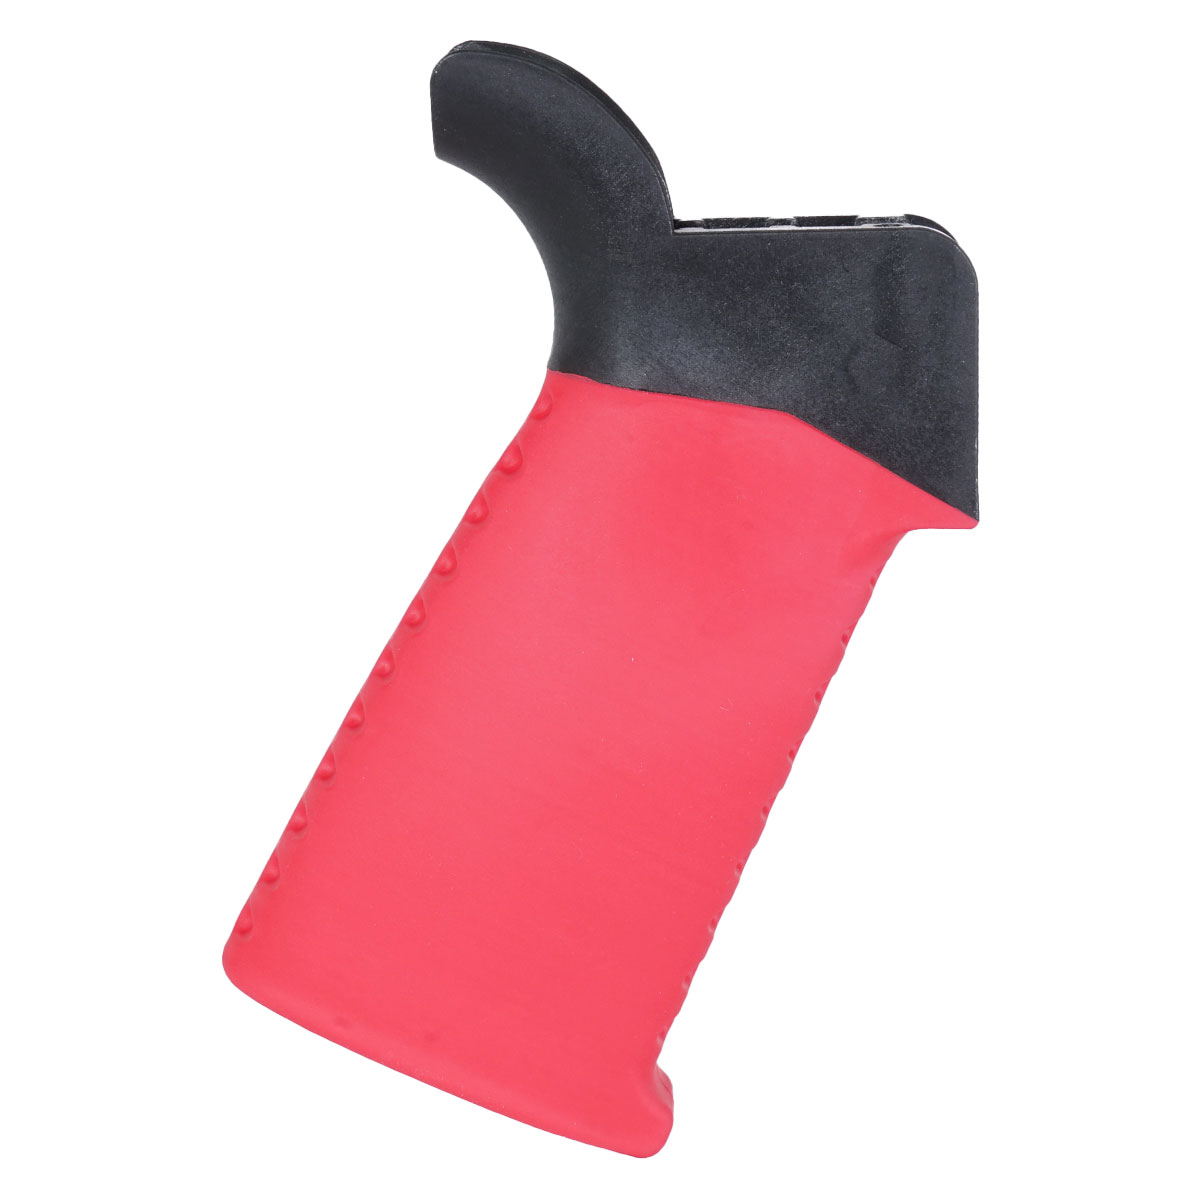 Team Accessories Corp AR15 Grip Window Grip Flared Smooth/Ribbed Red